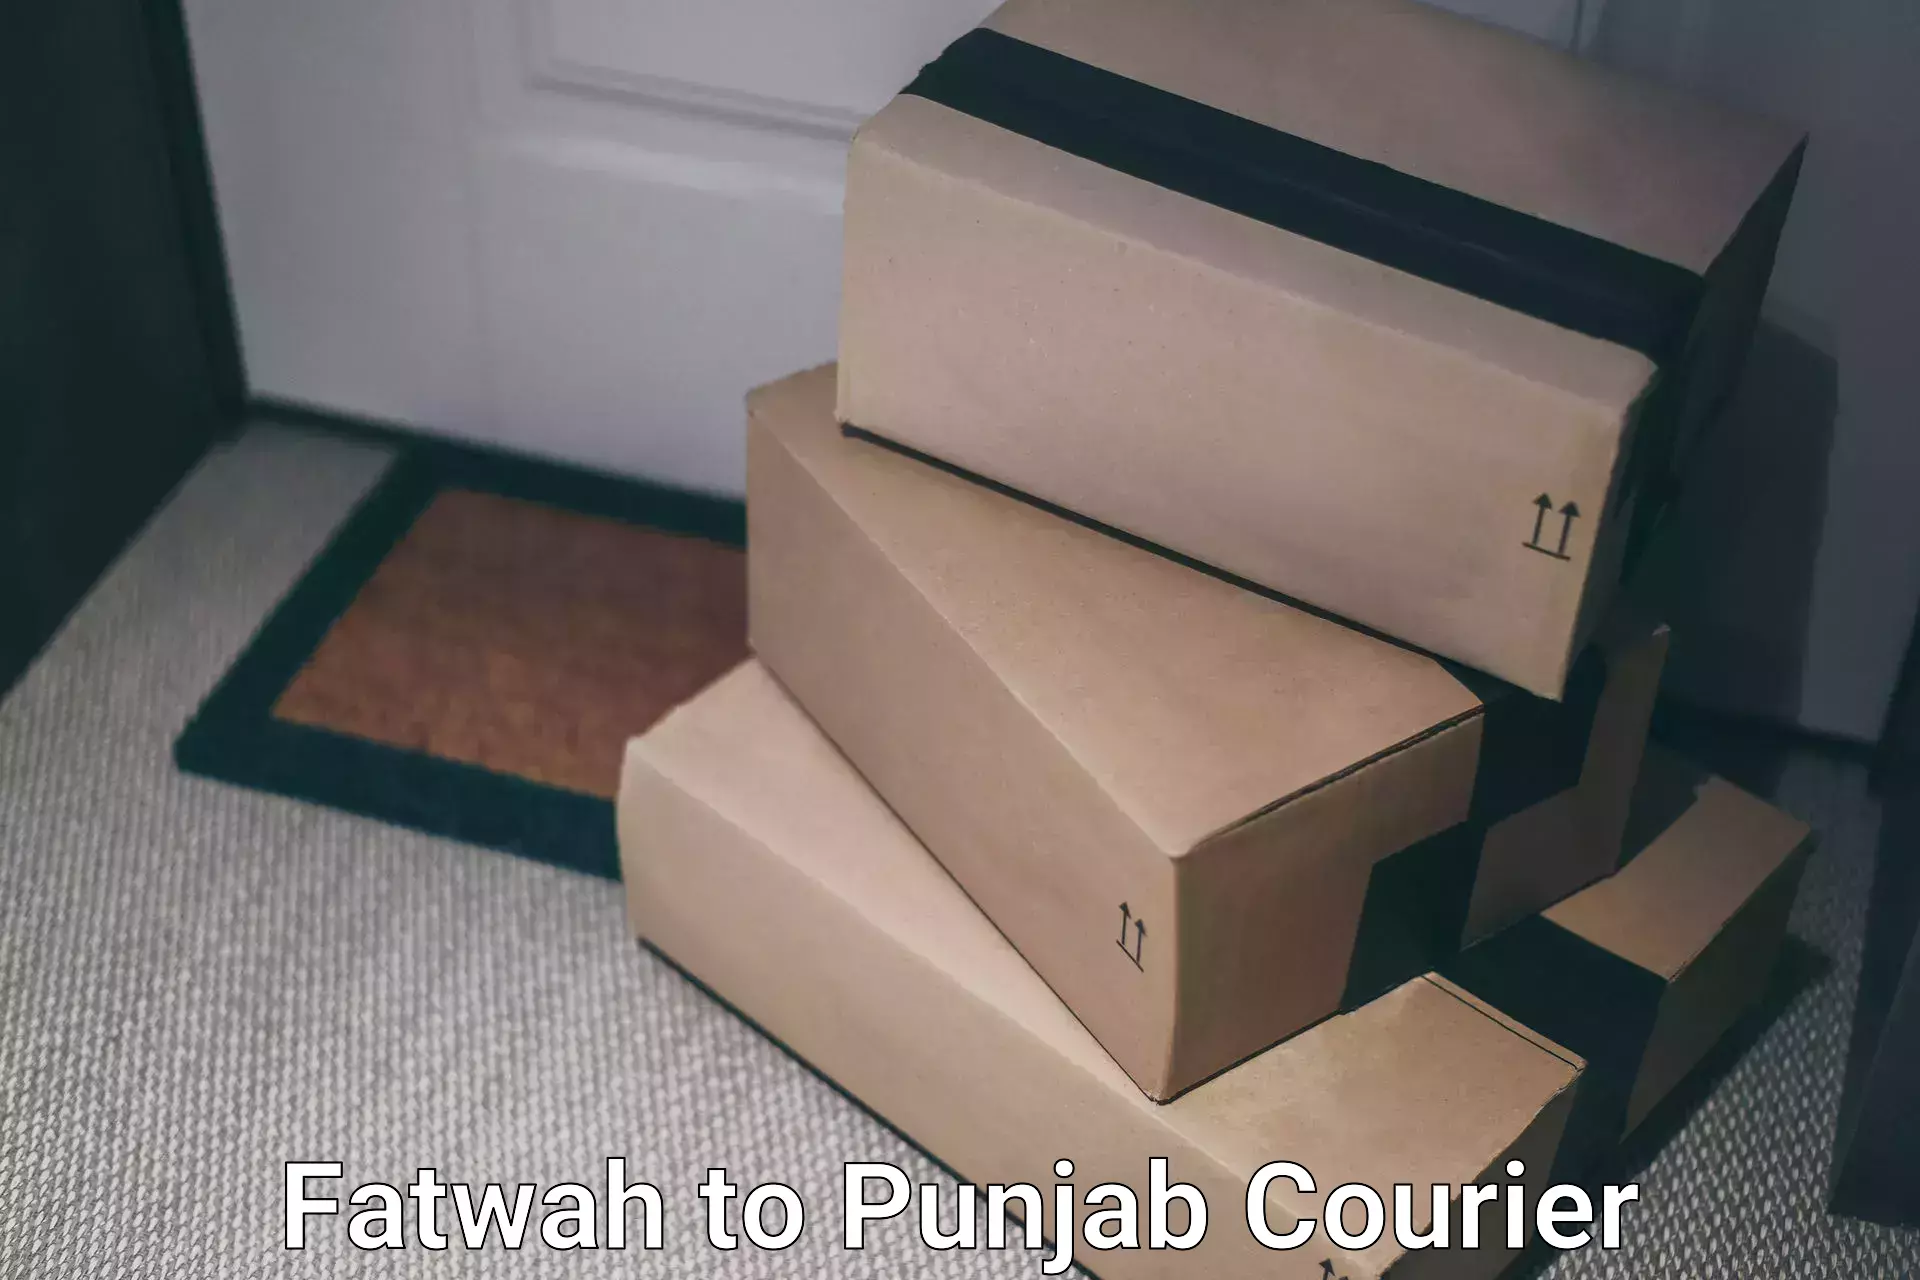 Delivery service partnership Fatwah to Patiala